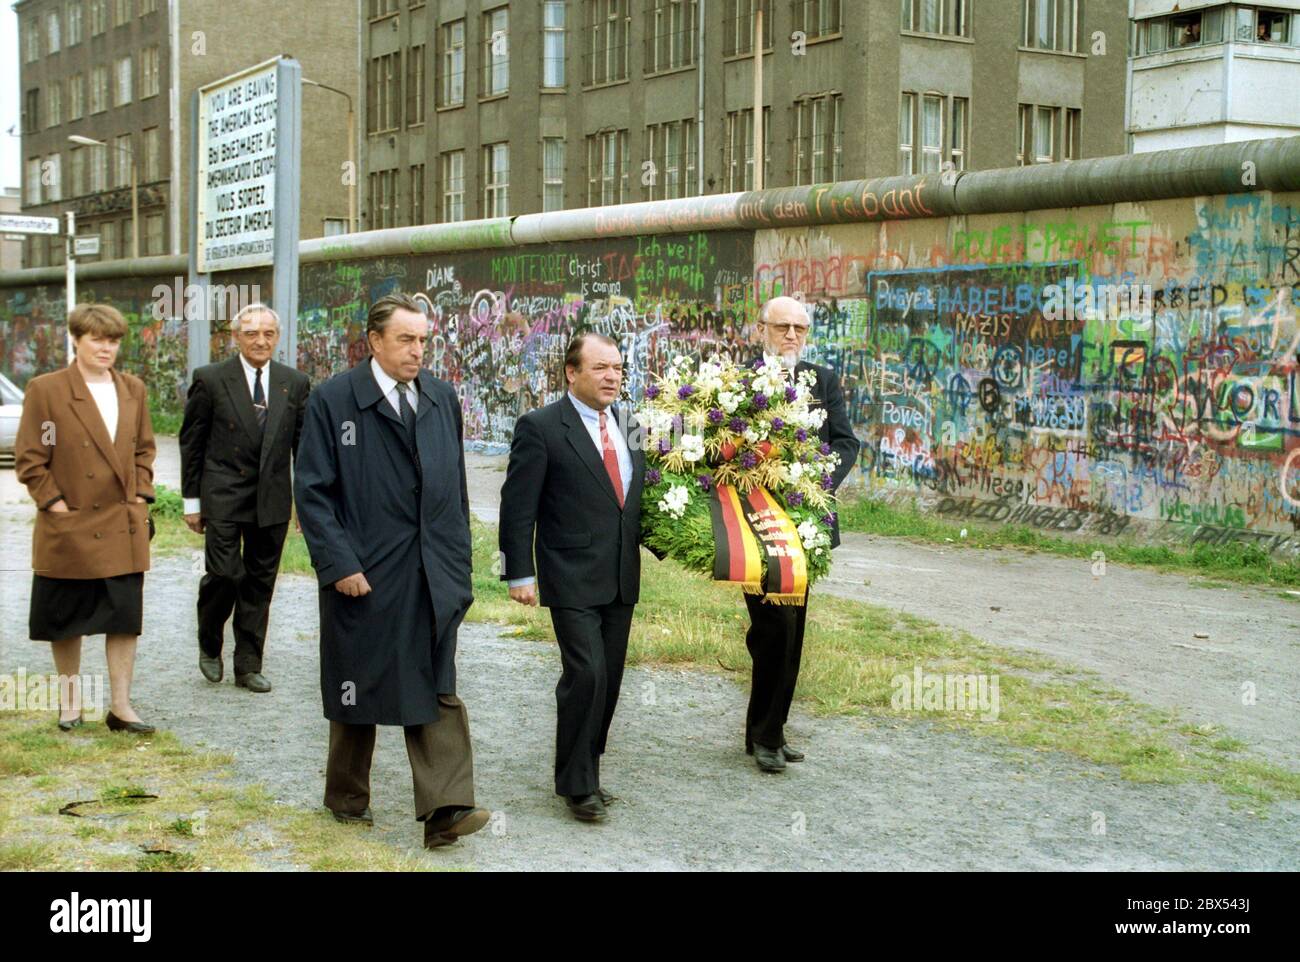 Berlin-Bezirke / Kreuzberg / 1987 Zimmerstrasse: Anniversary of the Berlin Wall: Laying of the wreath of the citizens' association at the monument for Peter Fechter. Heinrich Lummer, CDU, in front in the middle // Victims of the Wall / GDR / Wall [automated translation] Stock Photo